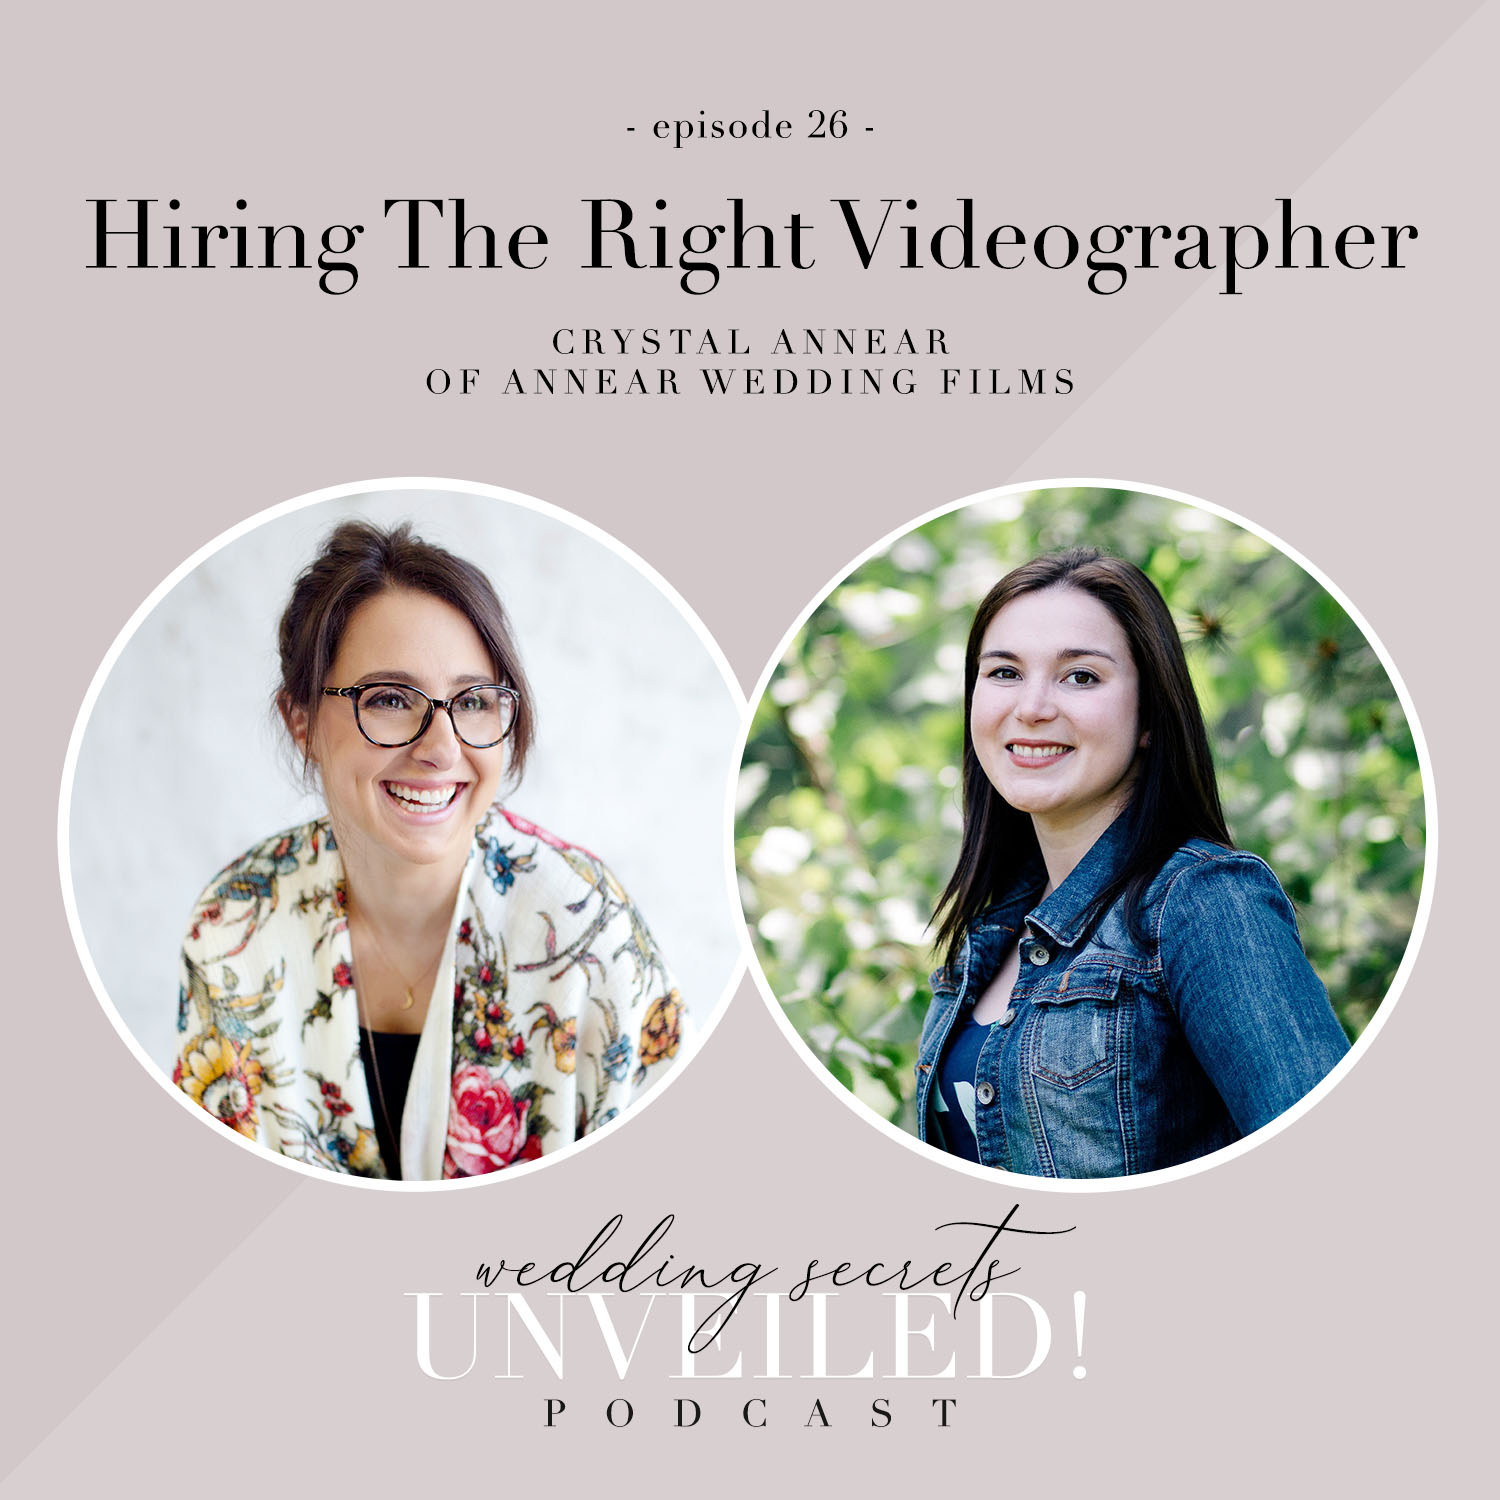 Hiring The Right Videographer: interview with Crystal Annear of Annear Wedding Films on Wedding Secrets Unveiled! Podcast